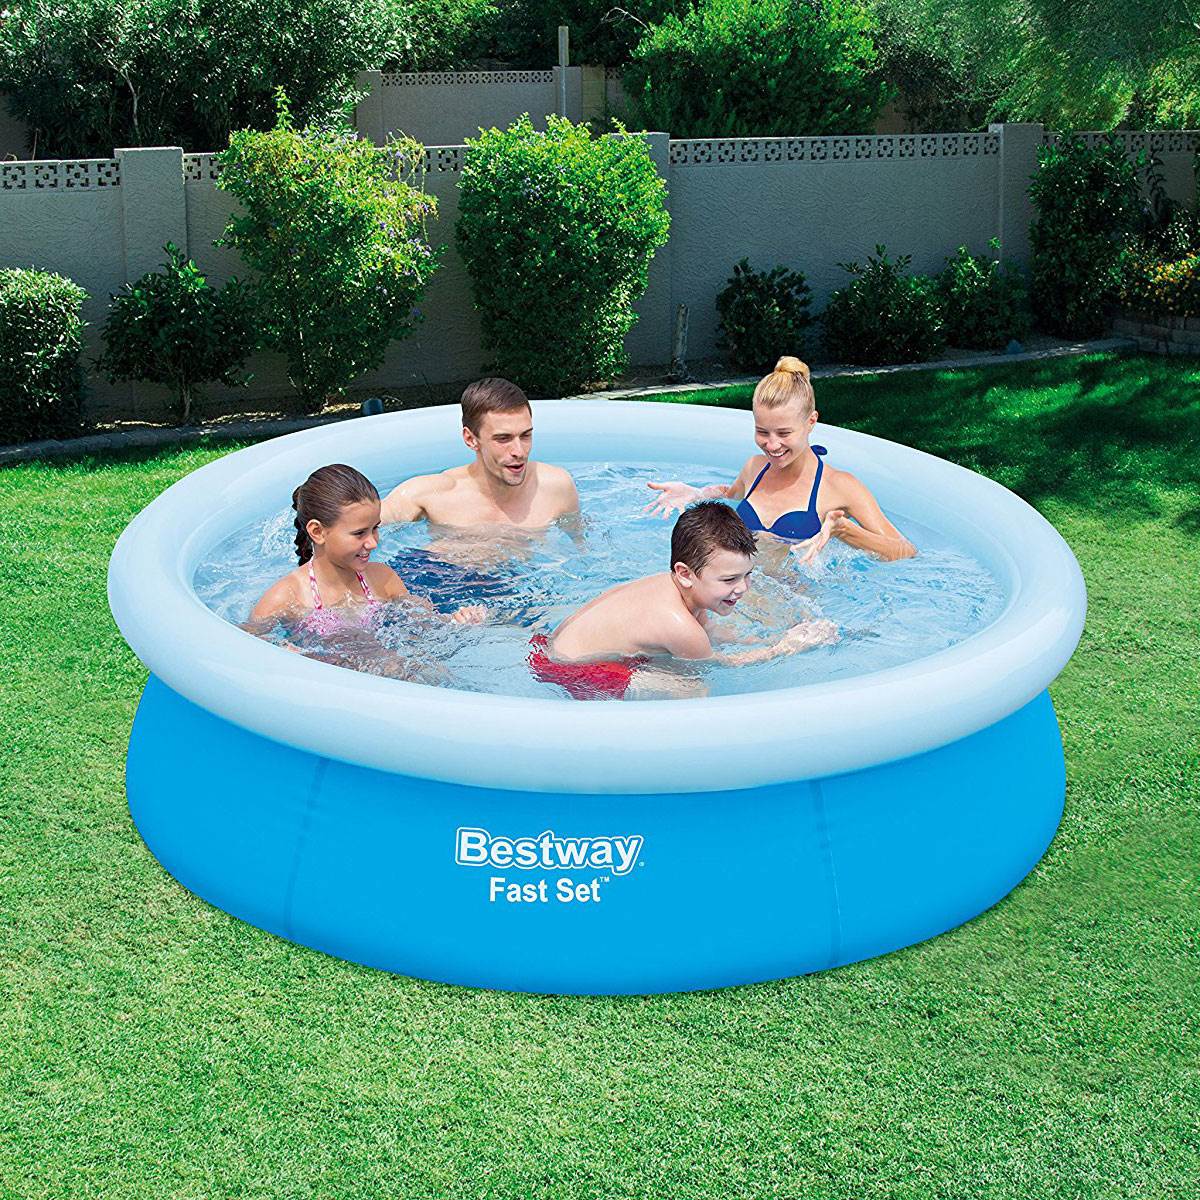 Creatice Bestway Above Ground Fast Set Swimming Pool Blue for Living room